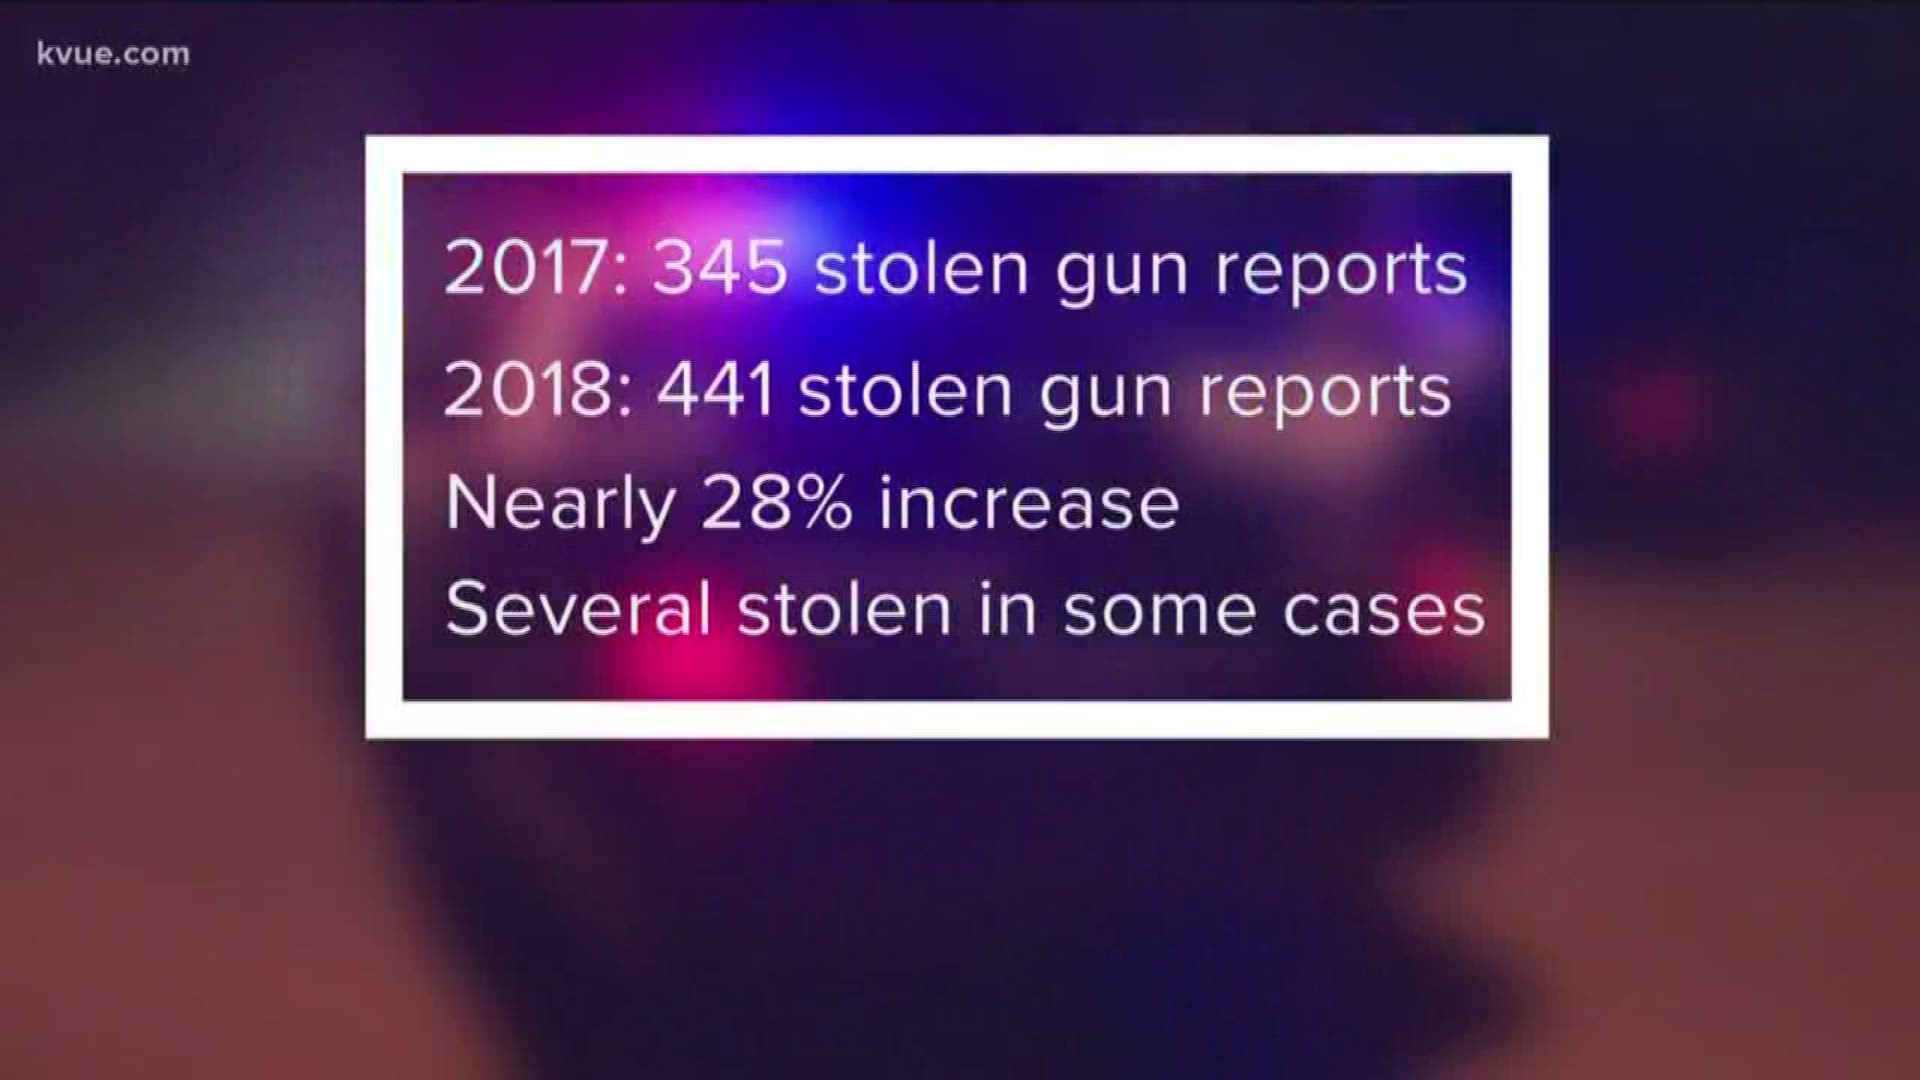 Thieves stole more guns from cars in Austin in 2018 than the year before.